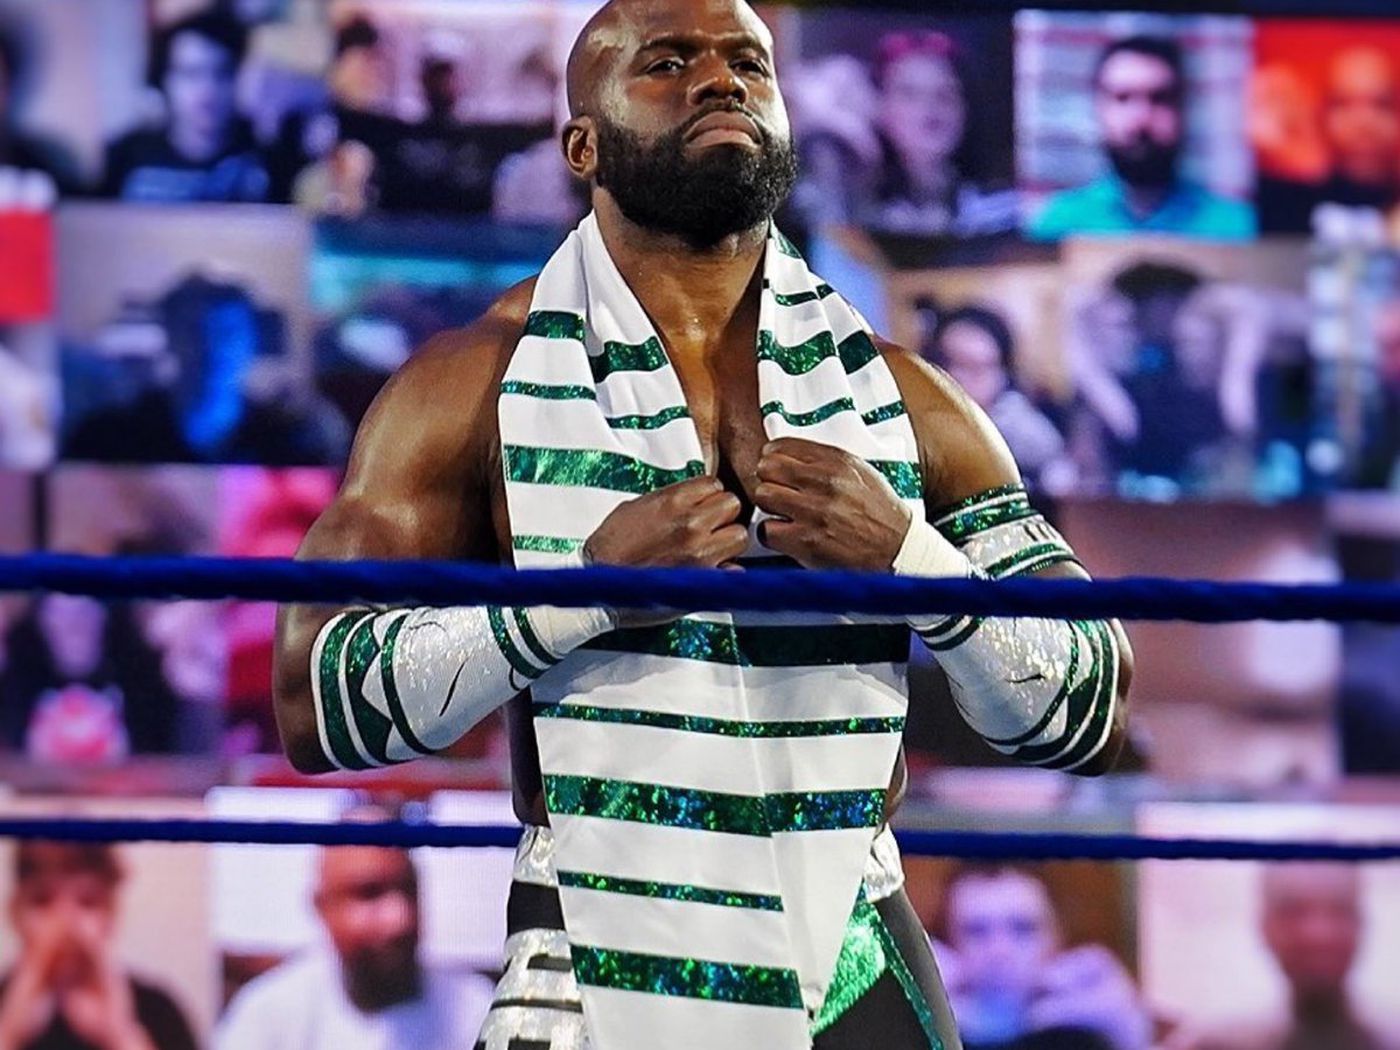 Apollo Crews returns to his cultural & indie roots for heel turn